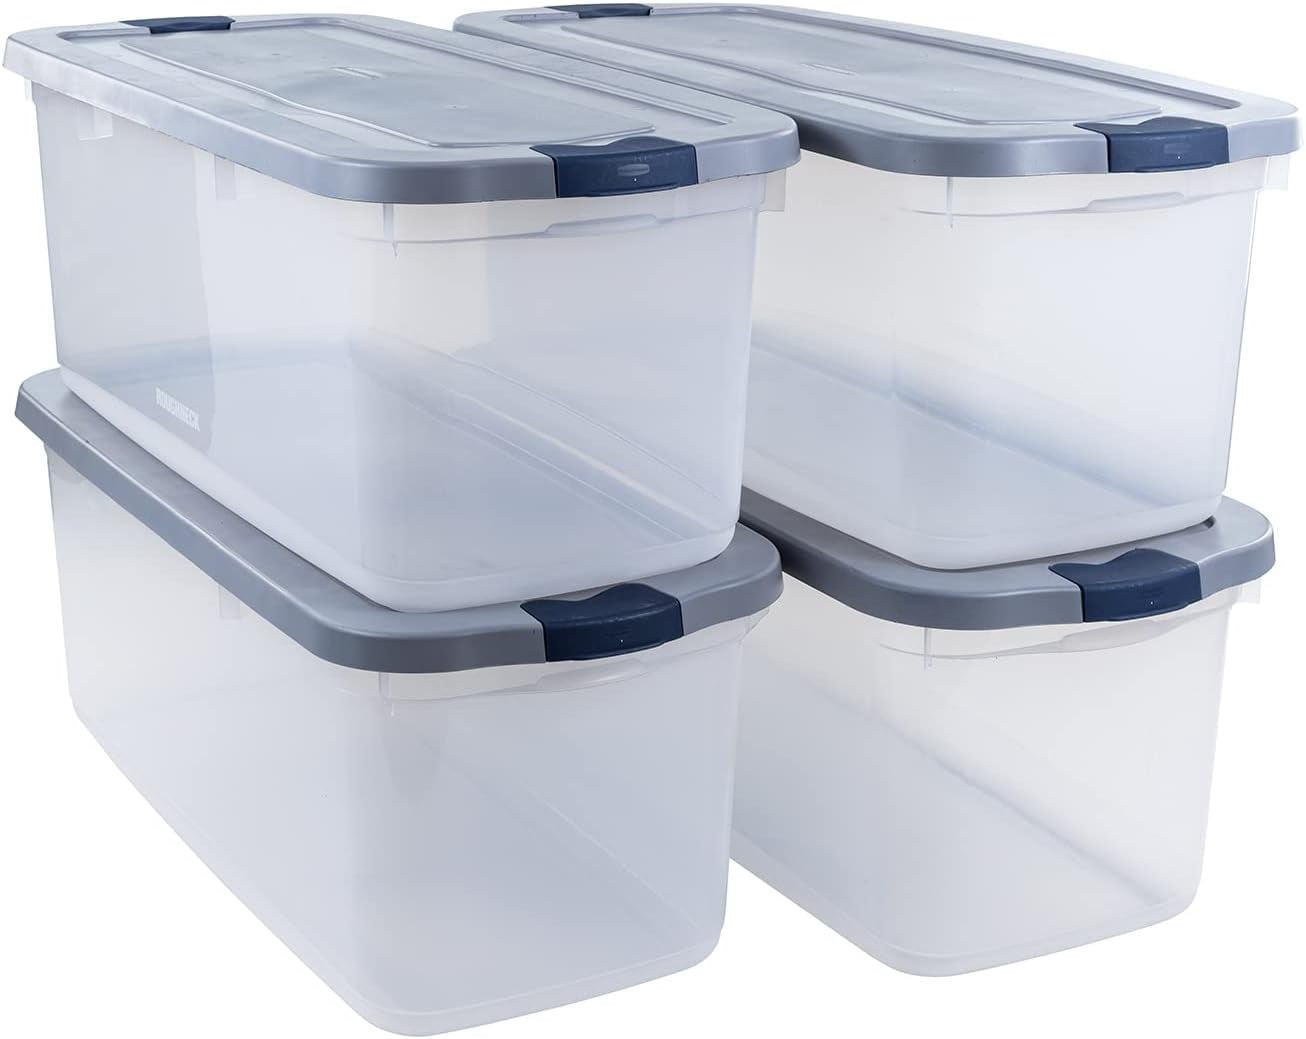  Citylife 4 Packs 5.3 QT Plastic Storage Bins with Latching  Lids Stackable Storage Containers for Organizing Clear Storage Box for  Garage, Closet, Kitchen